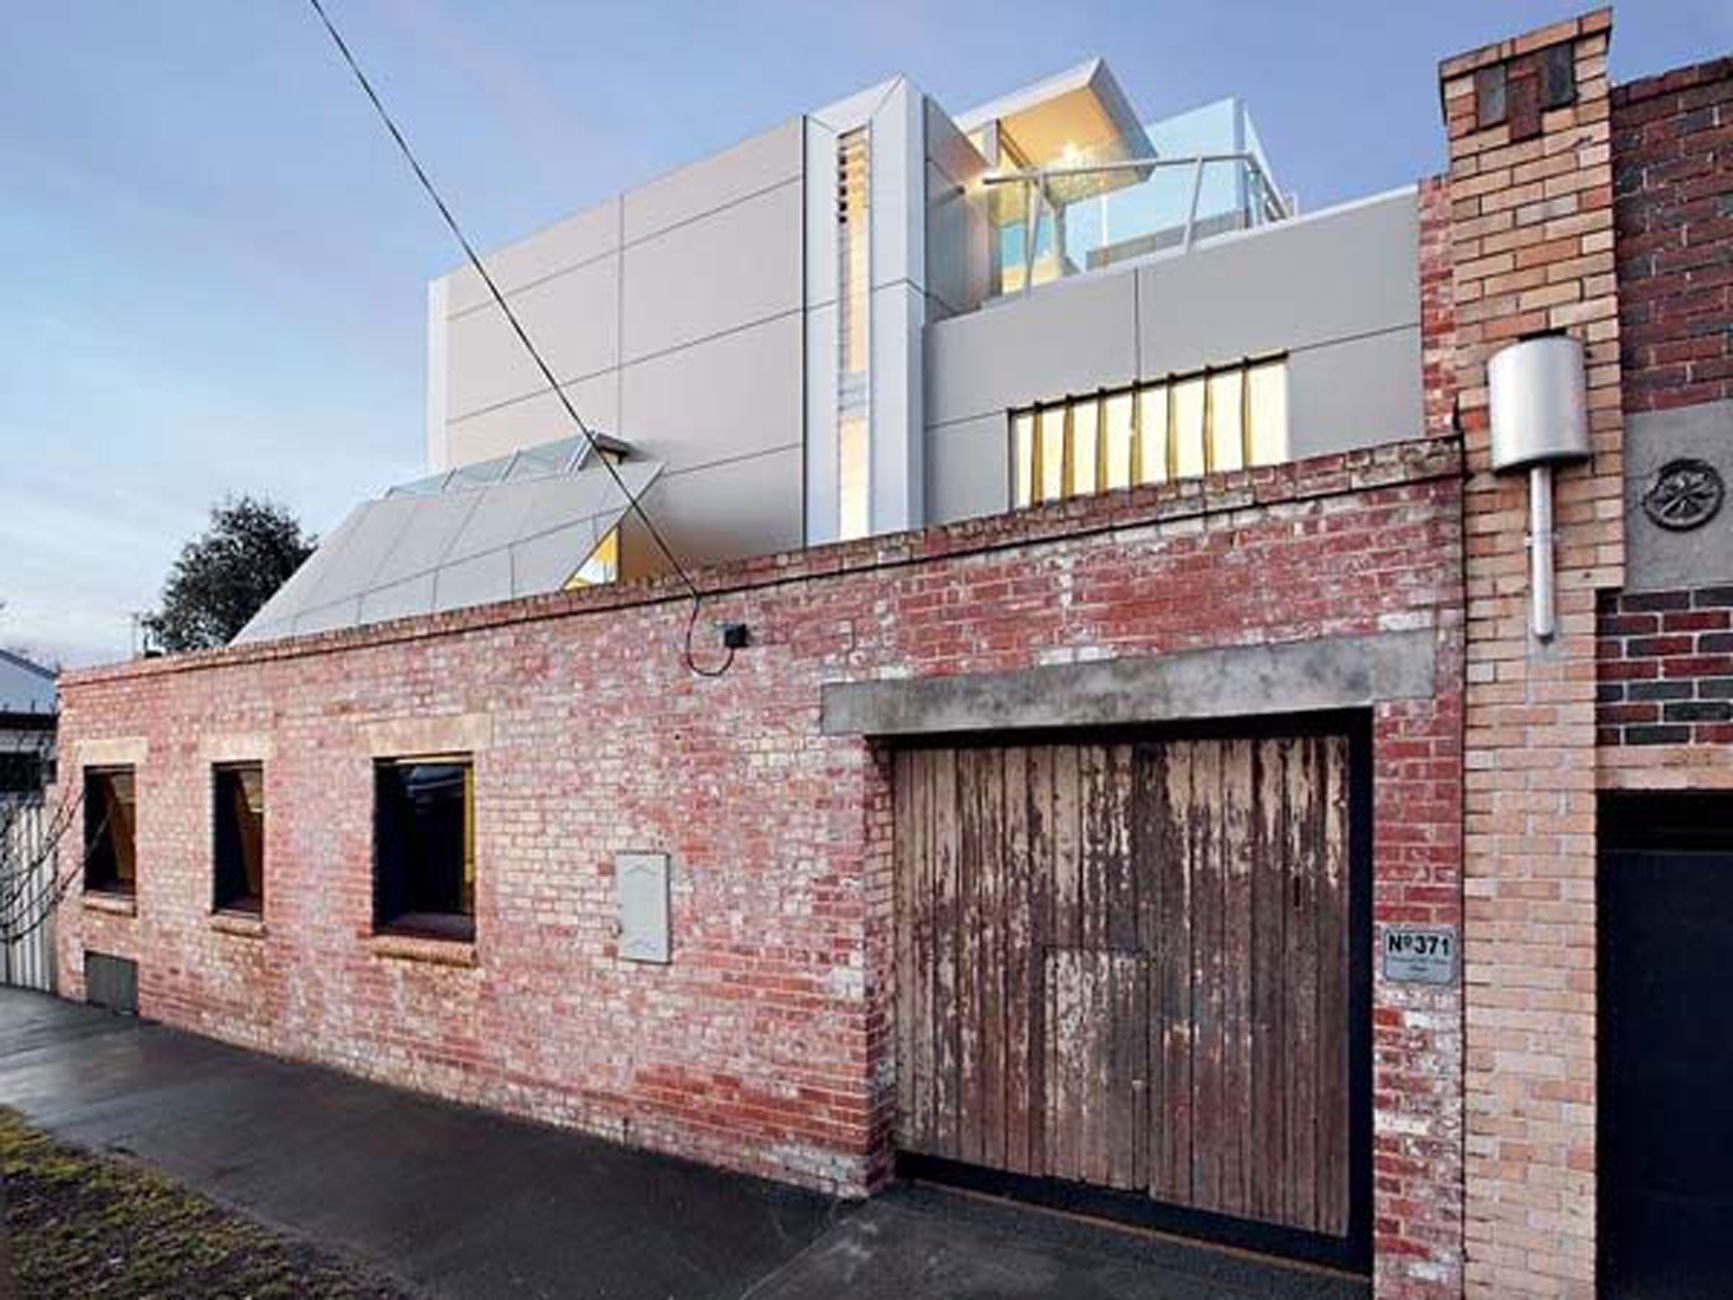 Contemporary House Designs Melbourne on Modern Interior Design Of An Industrial Style Home In Melbourne Modern